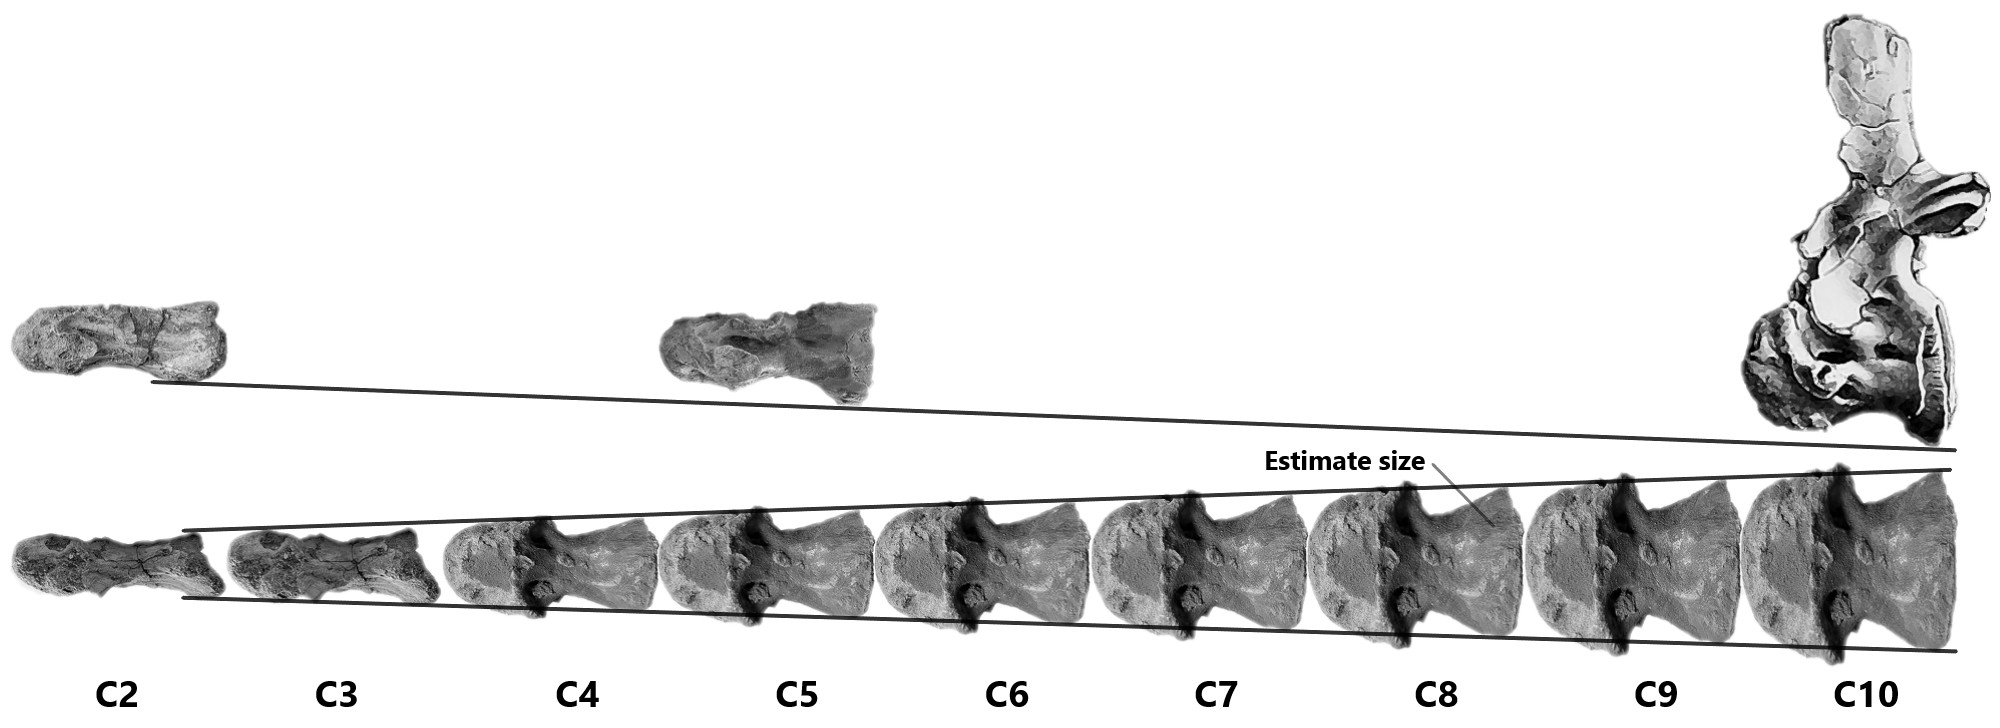 Estimate size of each cervical vertebra[8] in each position (in left lateral view and ventral view). One of the obvious feature is Spinosaurus dorsojuvencus show a very broad centrum at posterior cervical vertebra position.